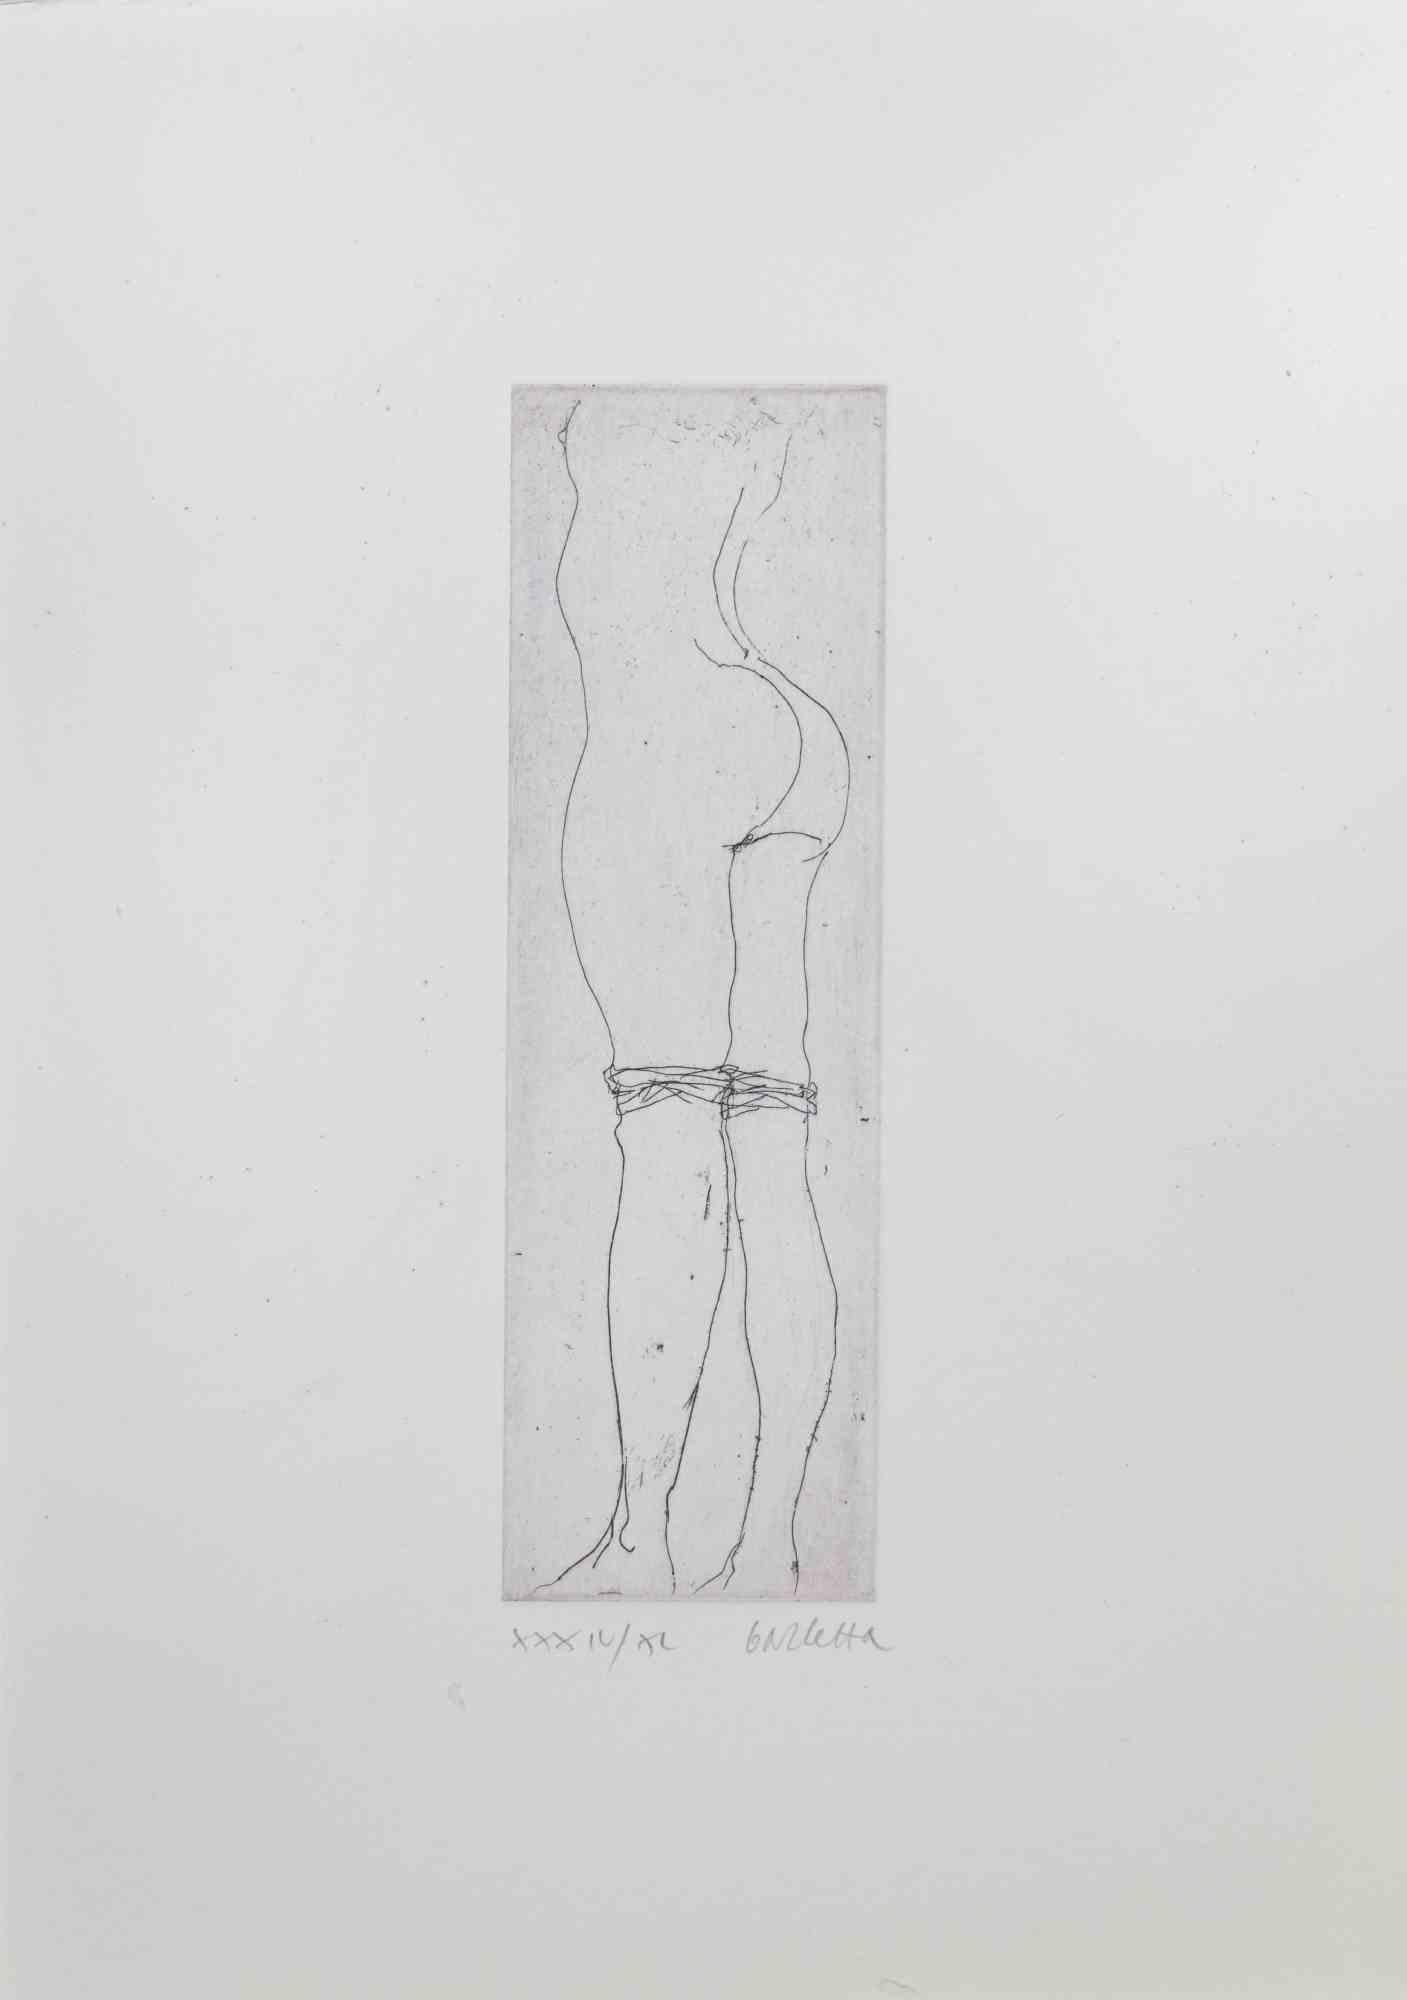 Nude is an etching on cardoboard realized by Sergio Barletta in 1974. 

sheet dimensions, 25 x 17 cm.

Handsigned in pencil in the lower right margin.

Edition XXXIV/XL 

Good condtions